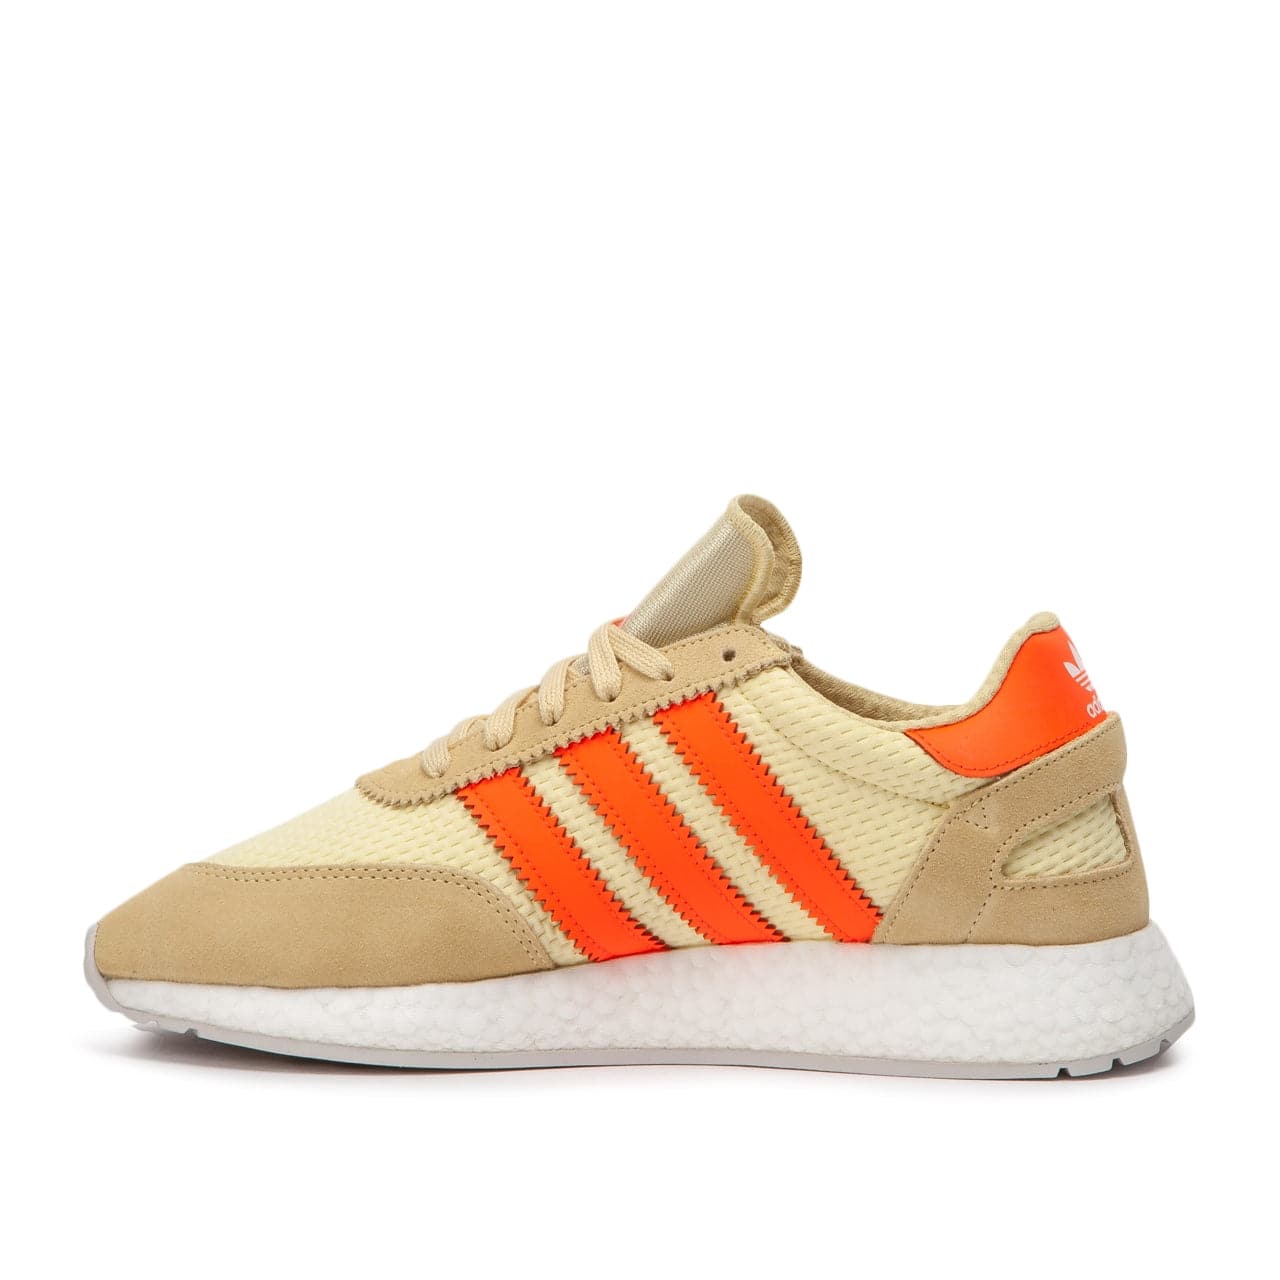 adidas I-5923 Boost (Yellow / Red)  - Allike Store